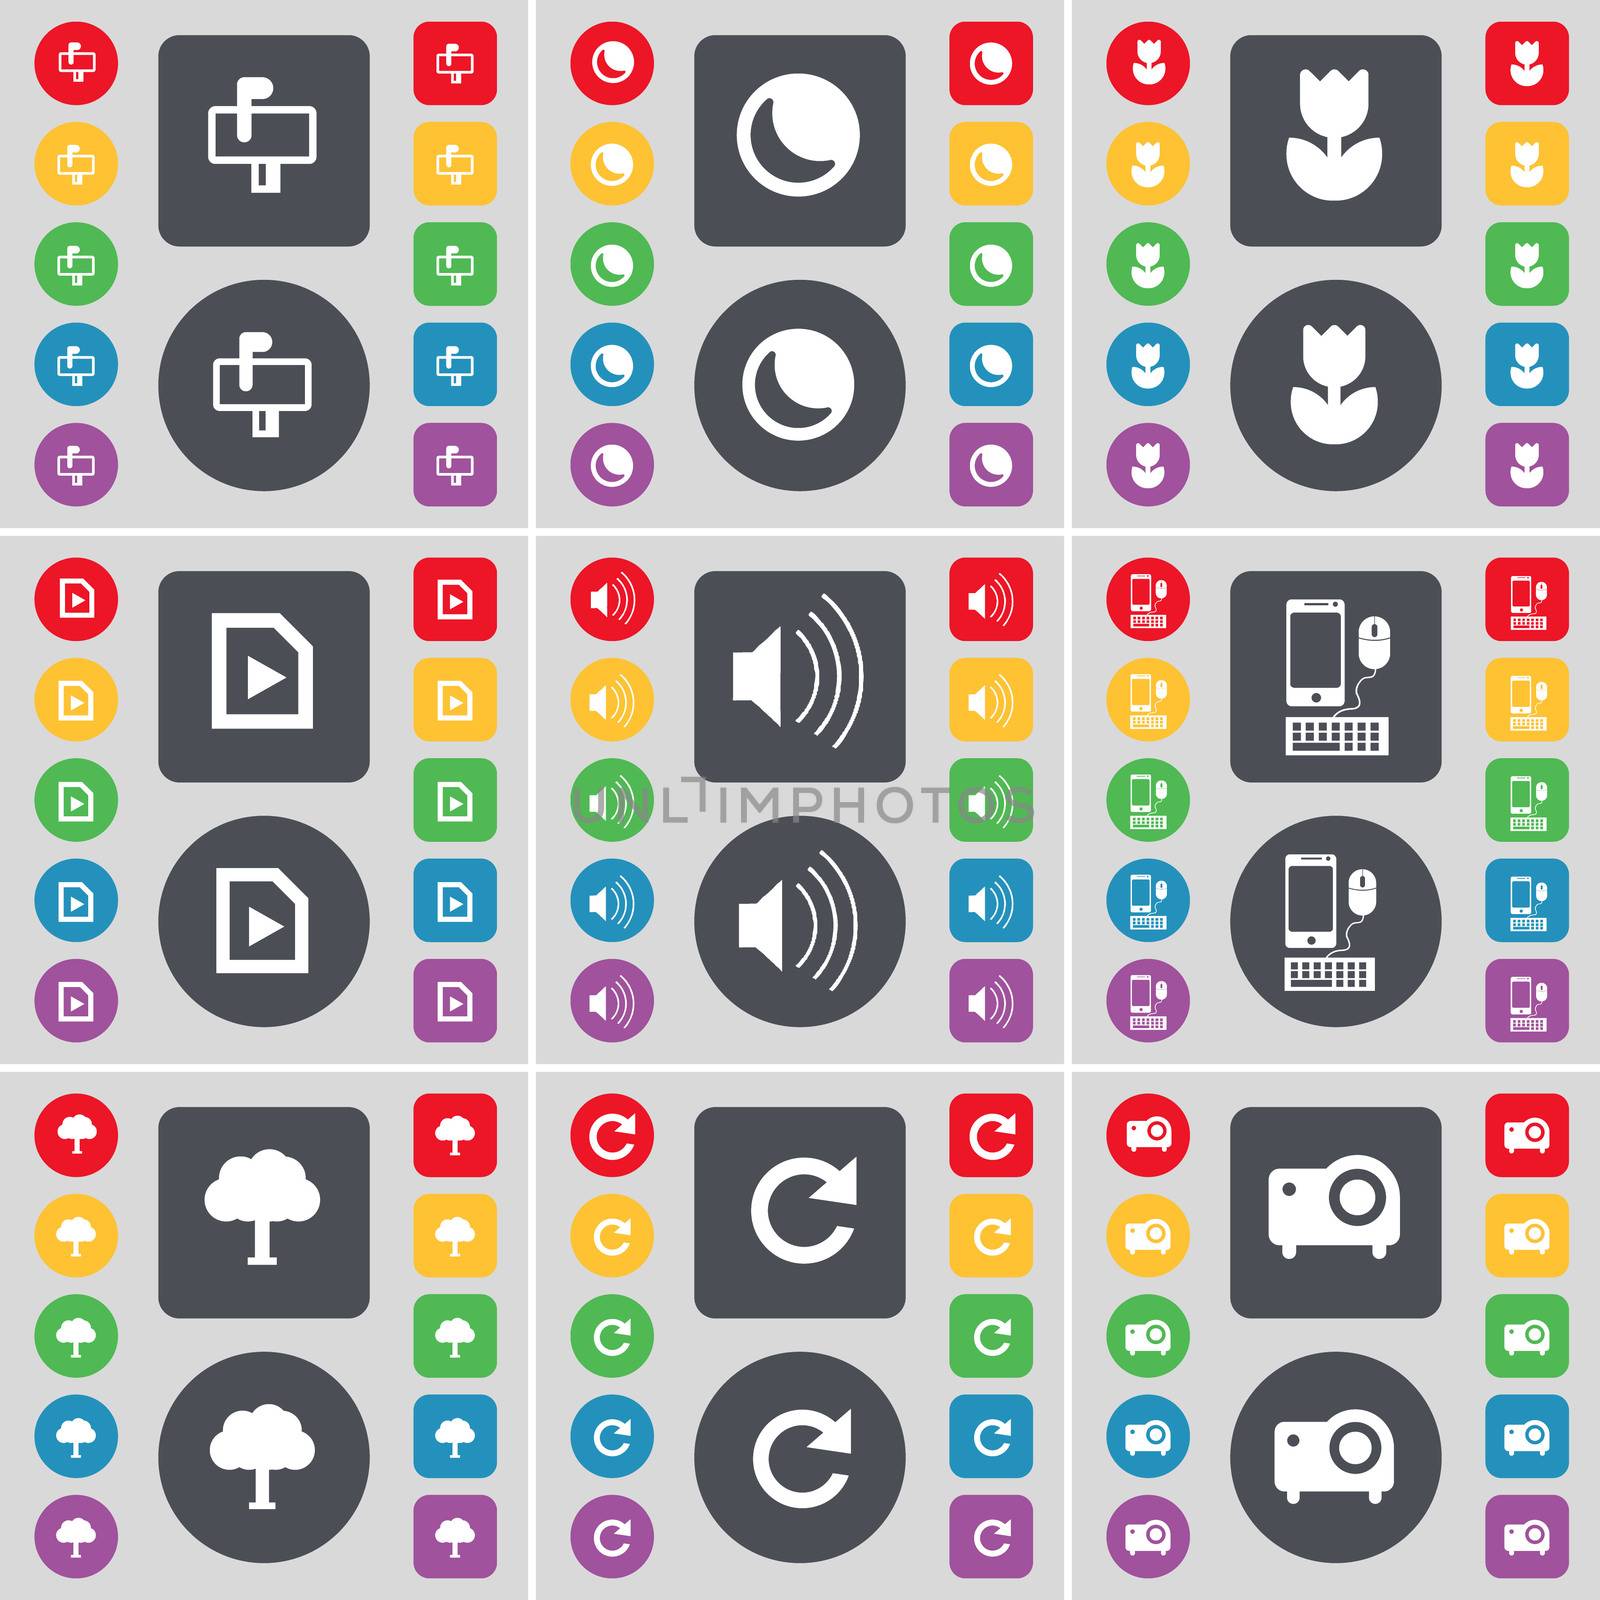 Mailbox, Moon, Flower, Media file, Sound, Smartphone, Tree, Reload, Projector icon symbol. A large set of flat, colored buttons for your design. illustration